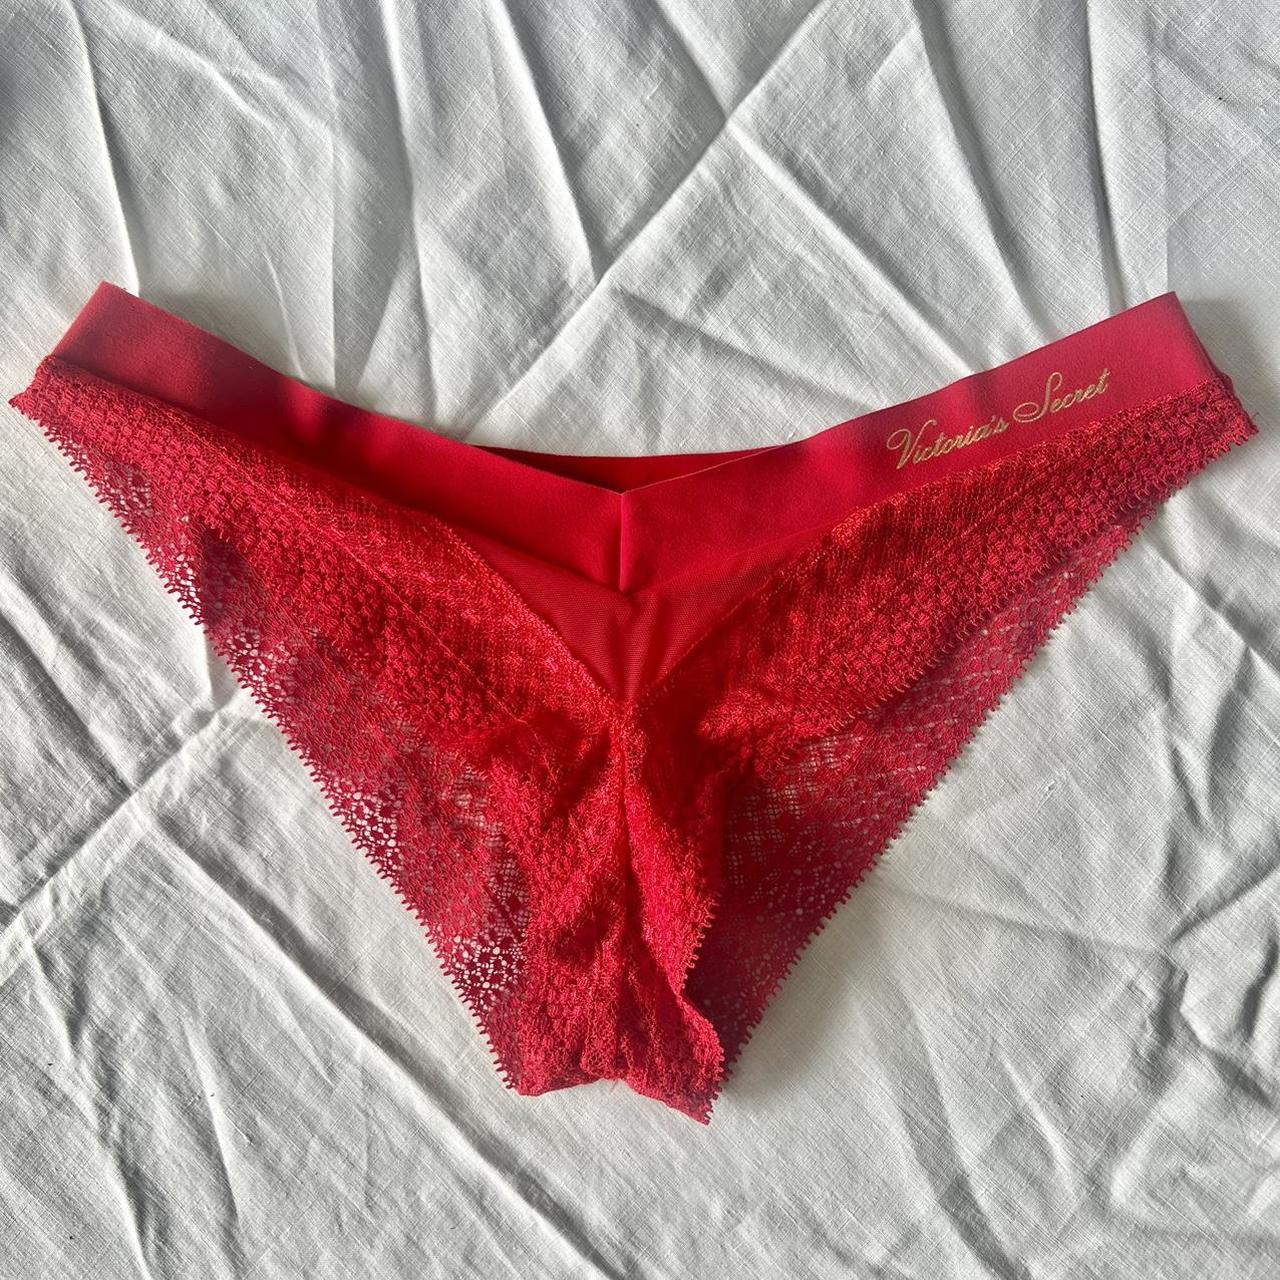 Knickers Red Thong Victoriassecret Lingerie